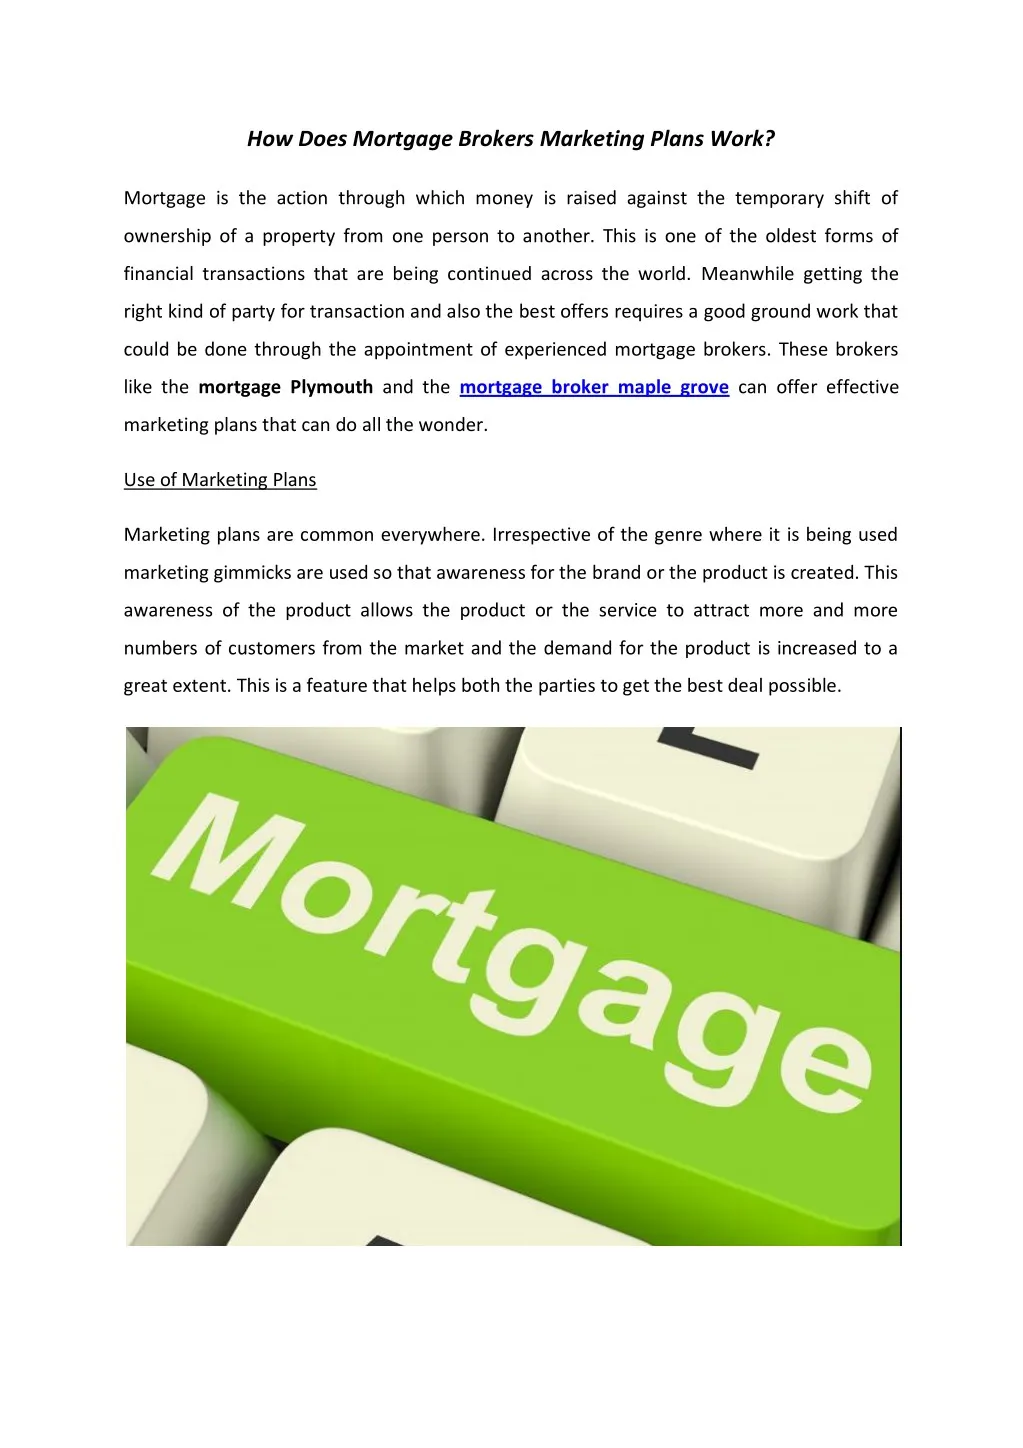 how does mortgage brokers marketing plans work